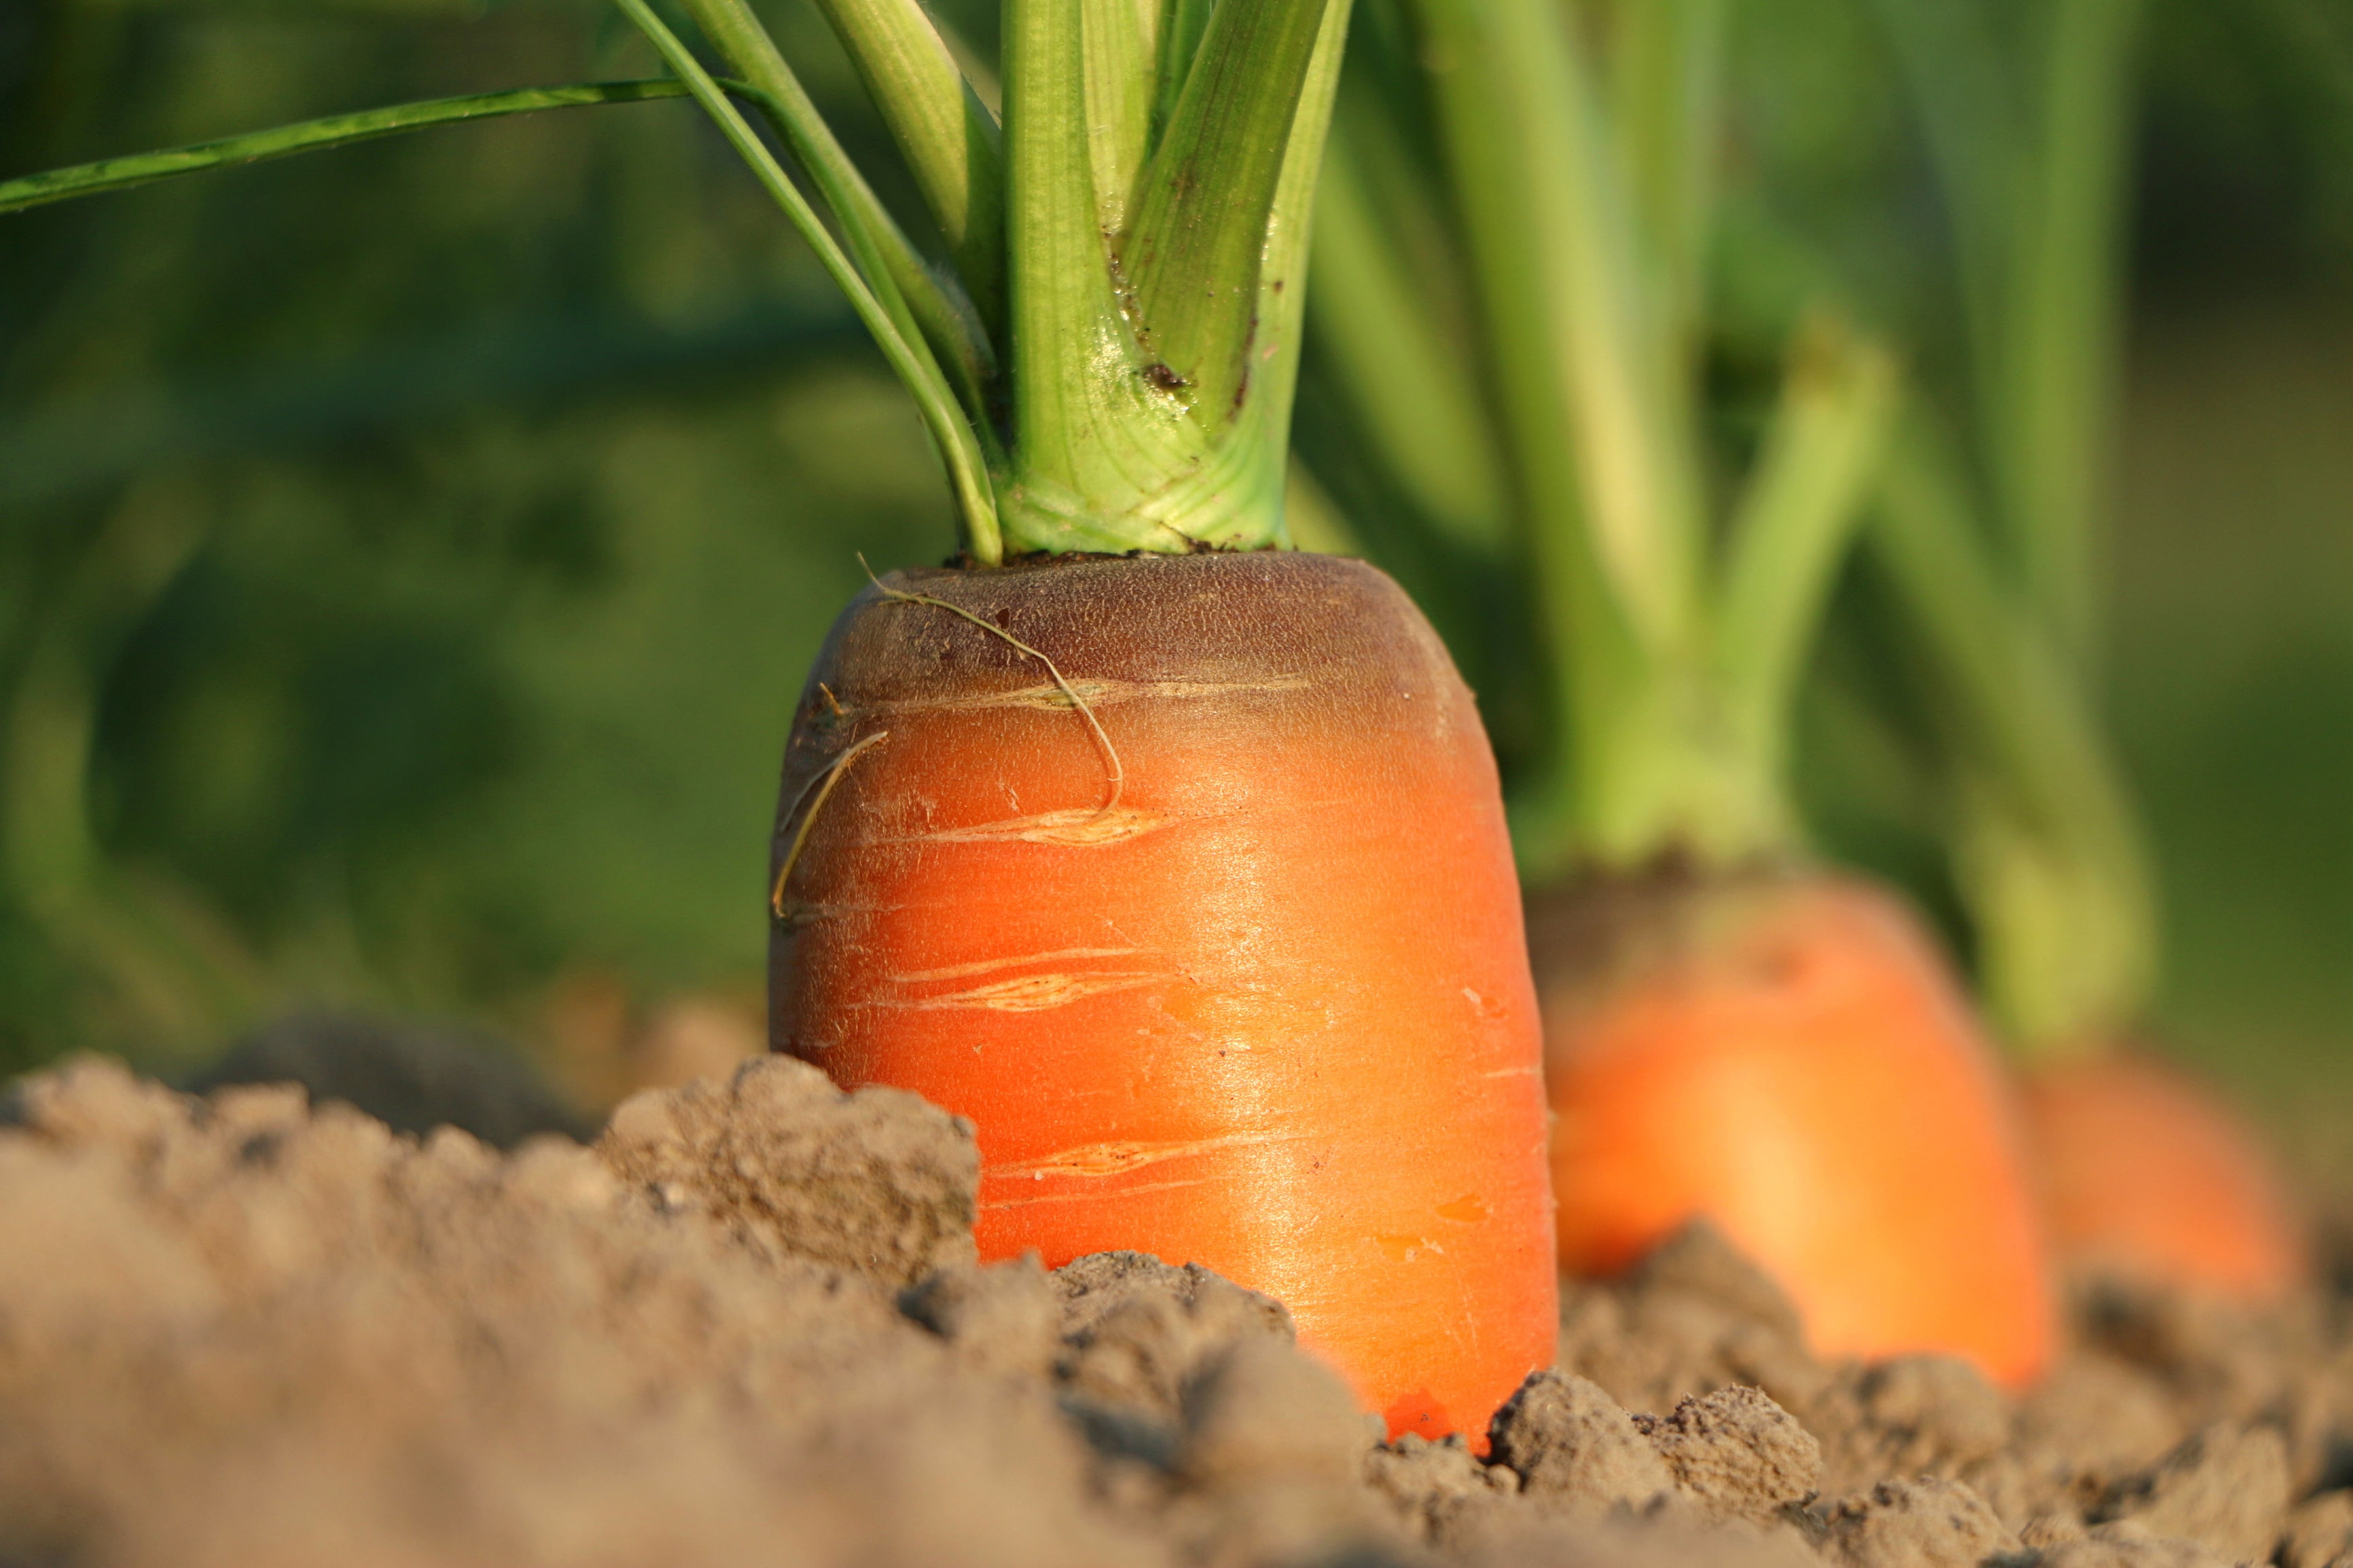 carrots, garden bed, vegetable, food and drink, plant, nature